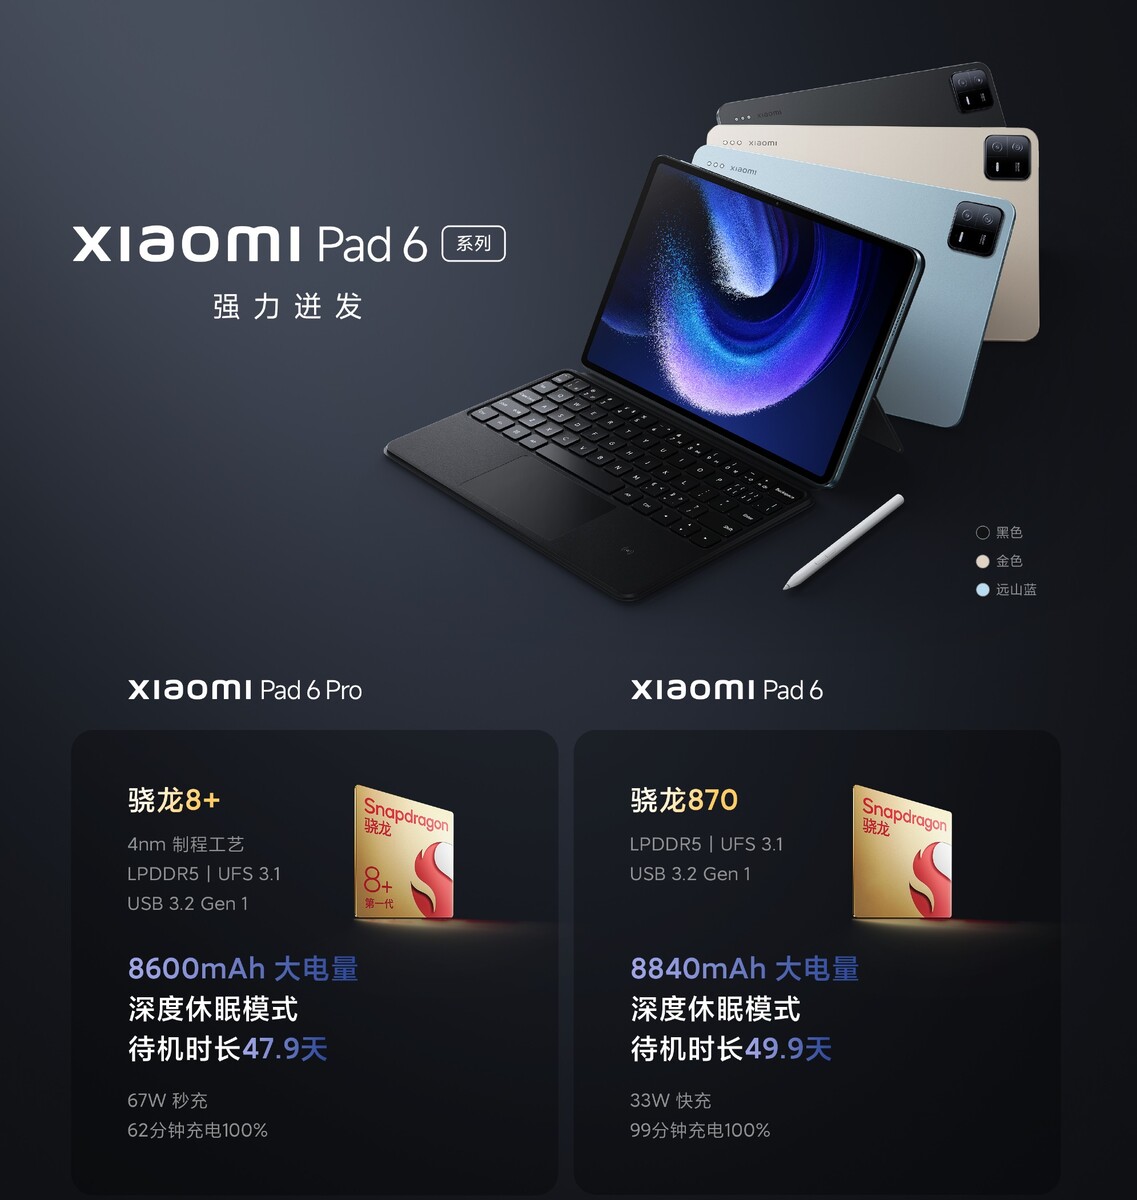 Xiaomi Pad 6, Pad 6 Pro Launched: Check Specs, Features, Price Of